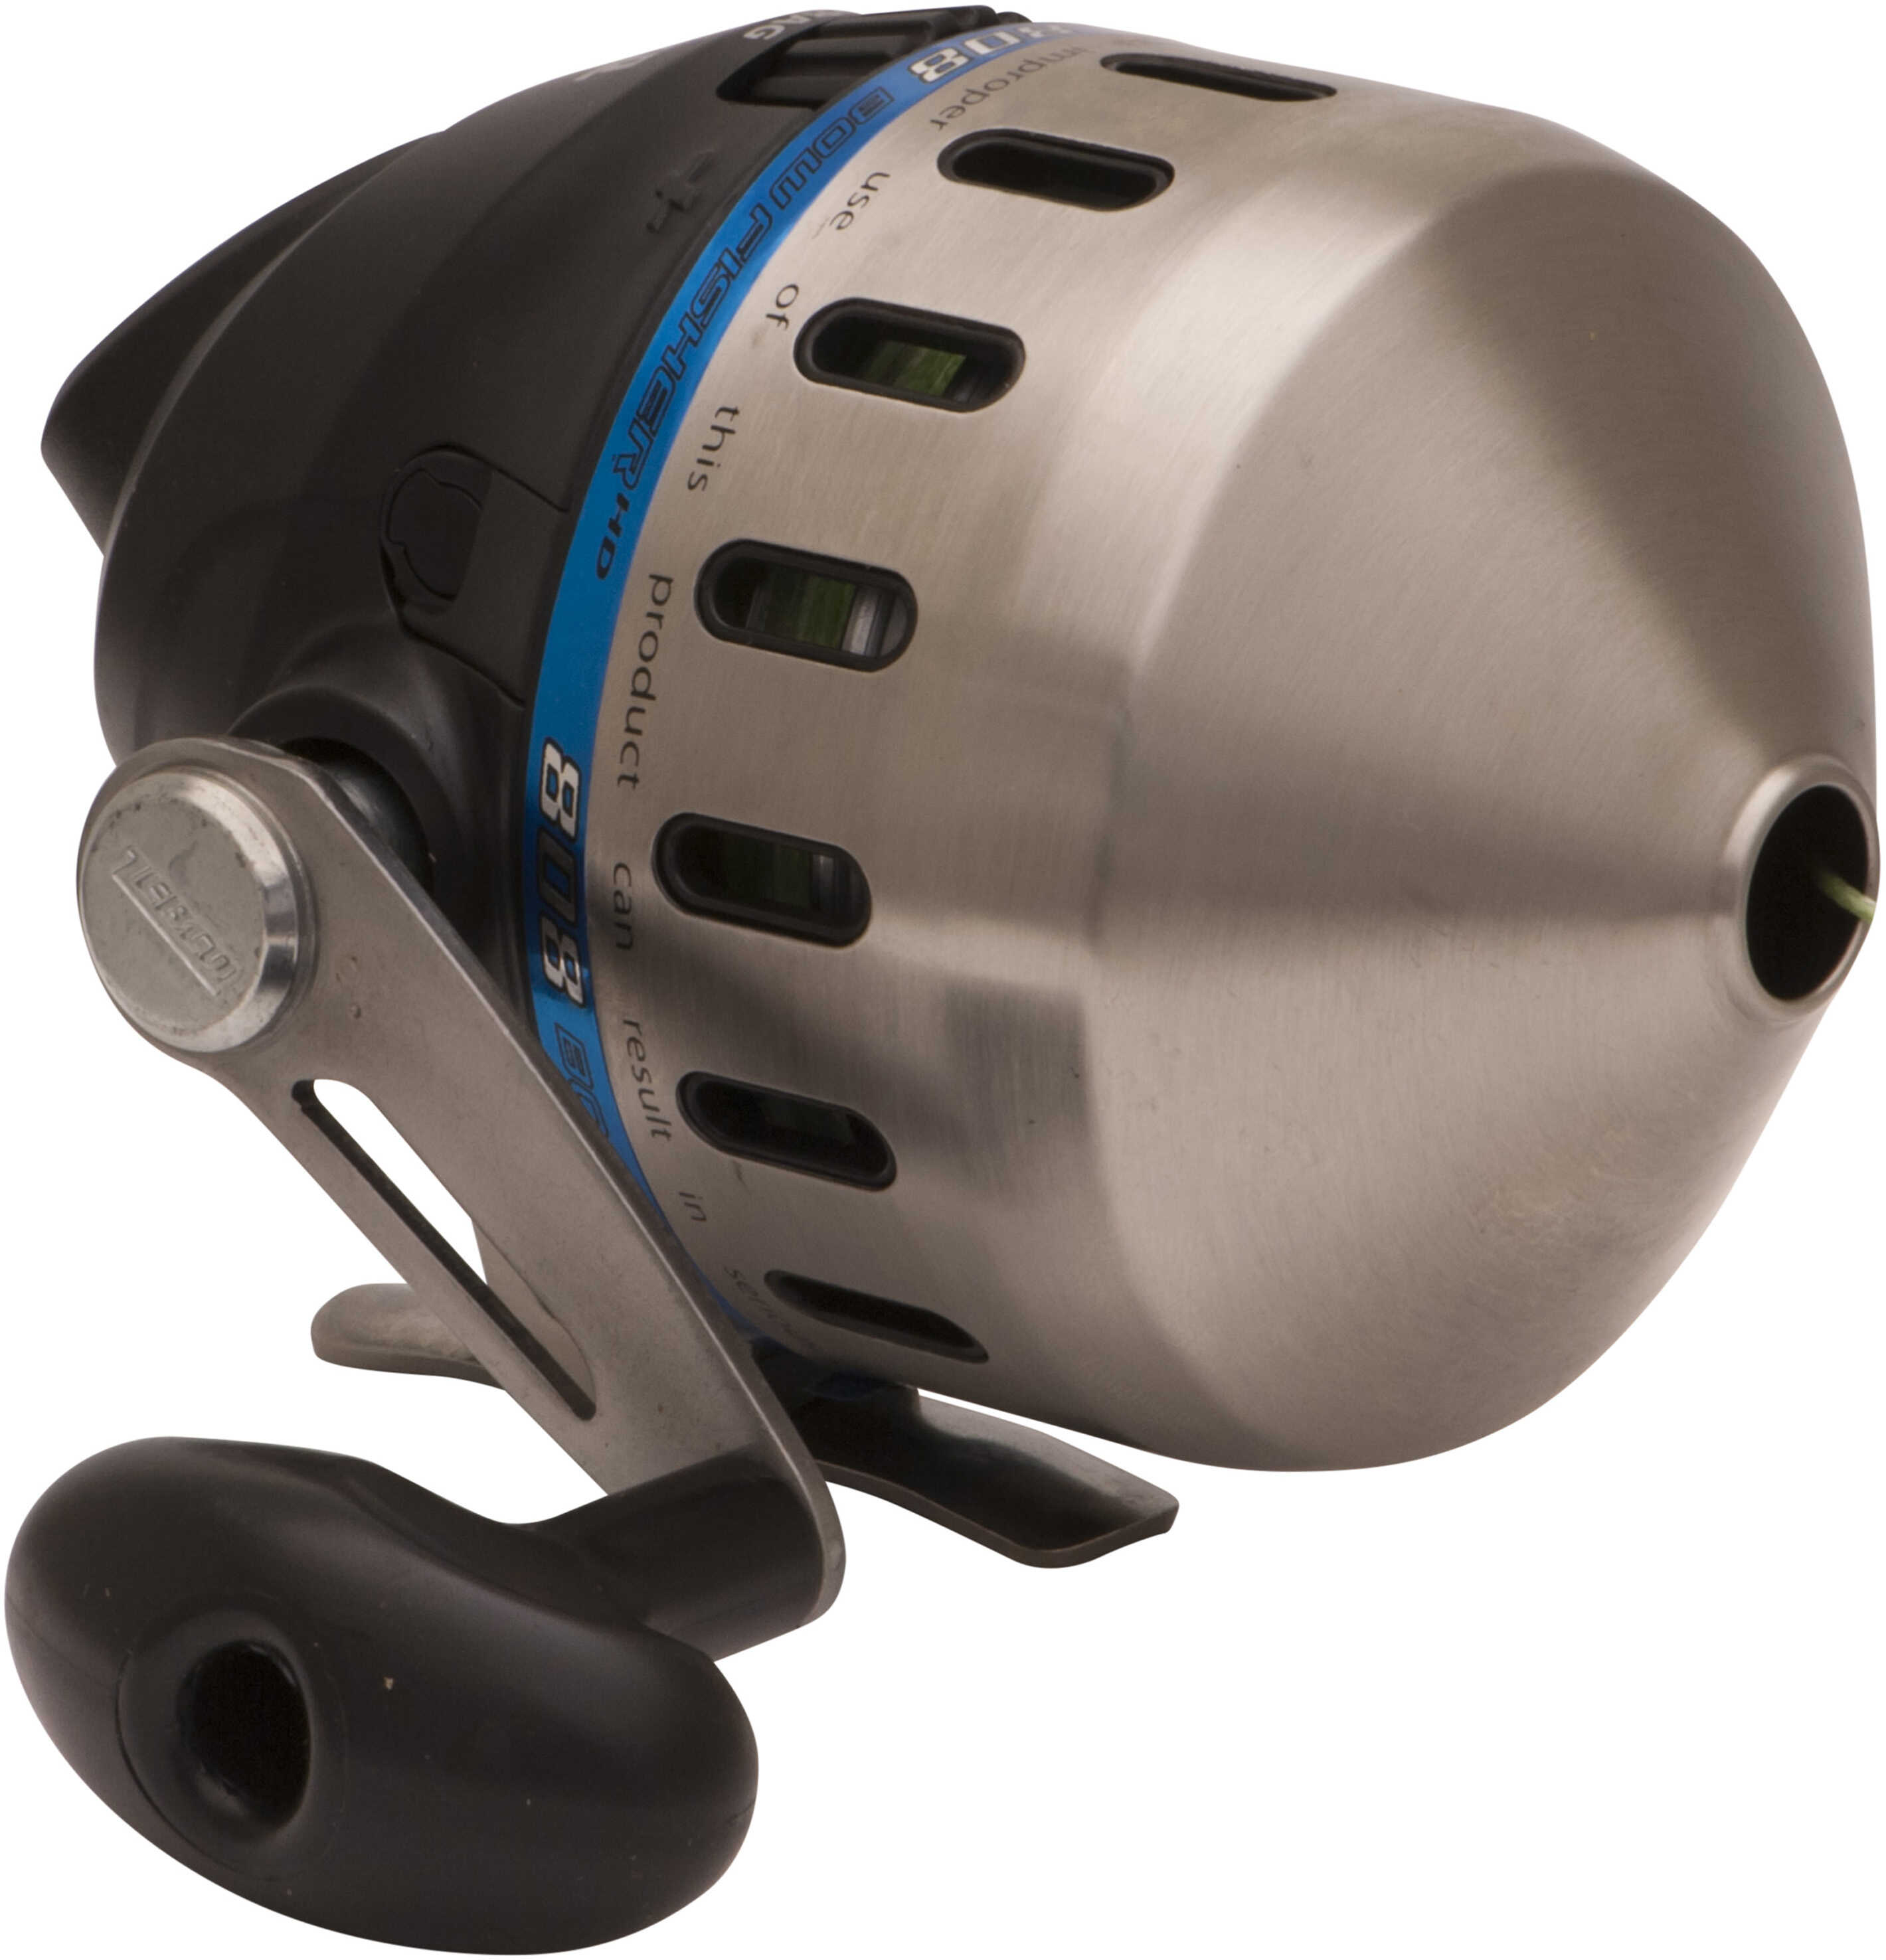 Zebco / Quantum 808 Series Reel Bowfisher, Spincast, Boxed Md: 808HBOWHD,200,BX3